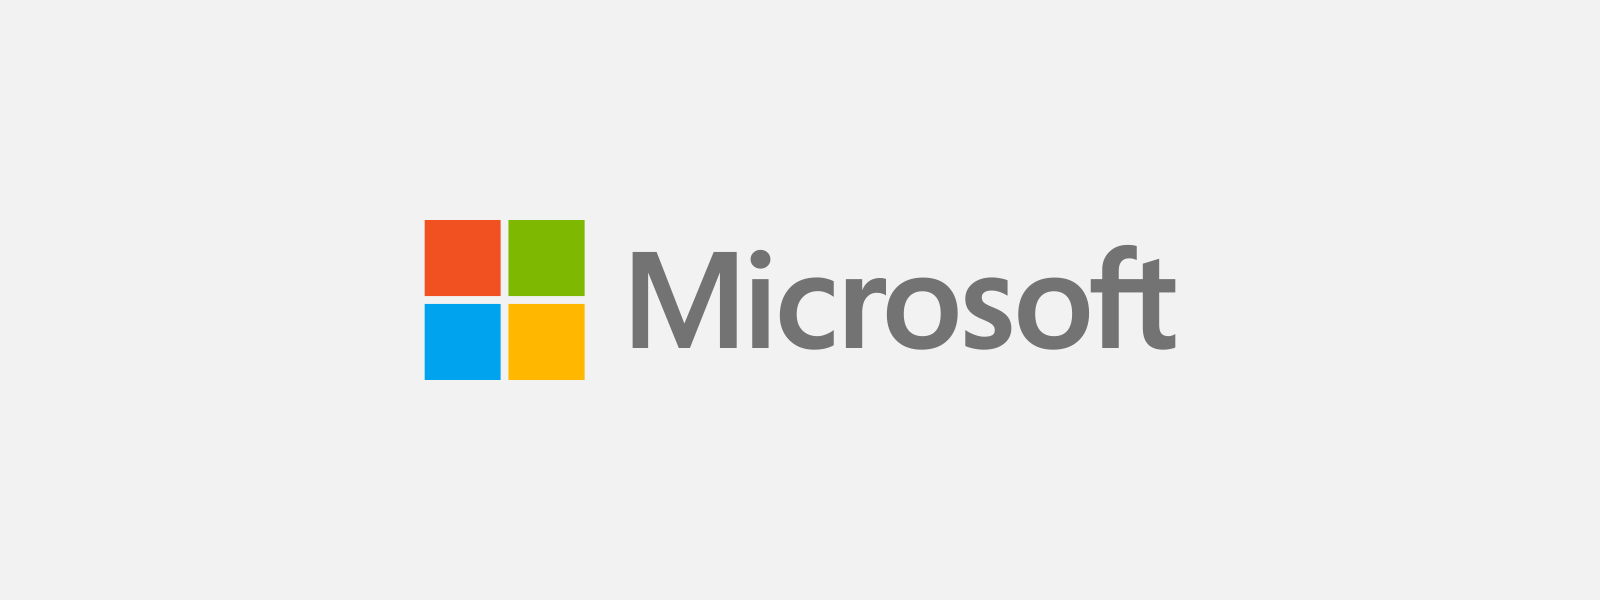 Microsoft – Cloud, Computer, Apps und Gaming